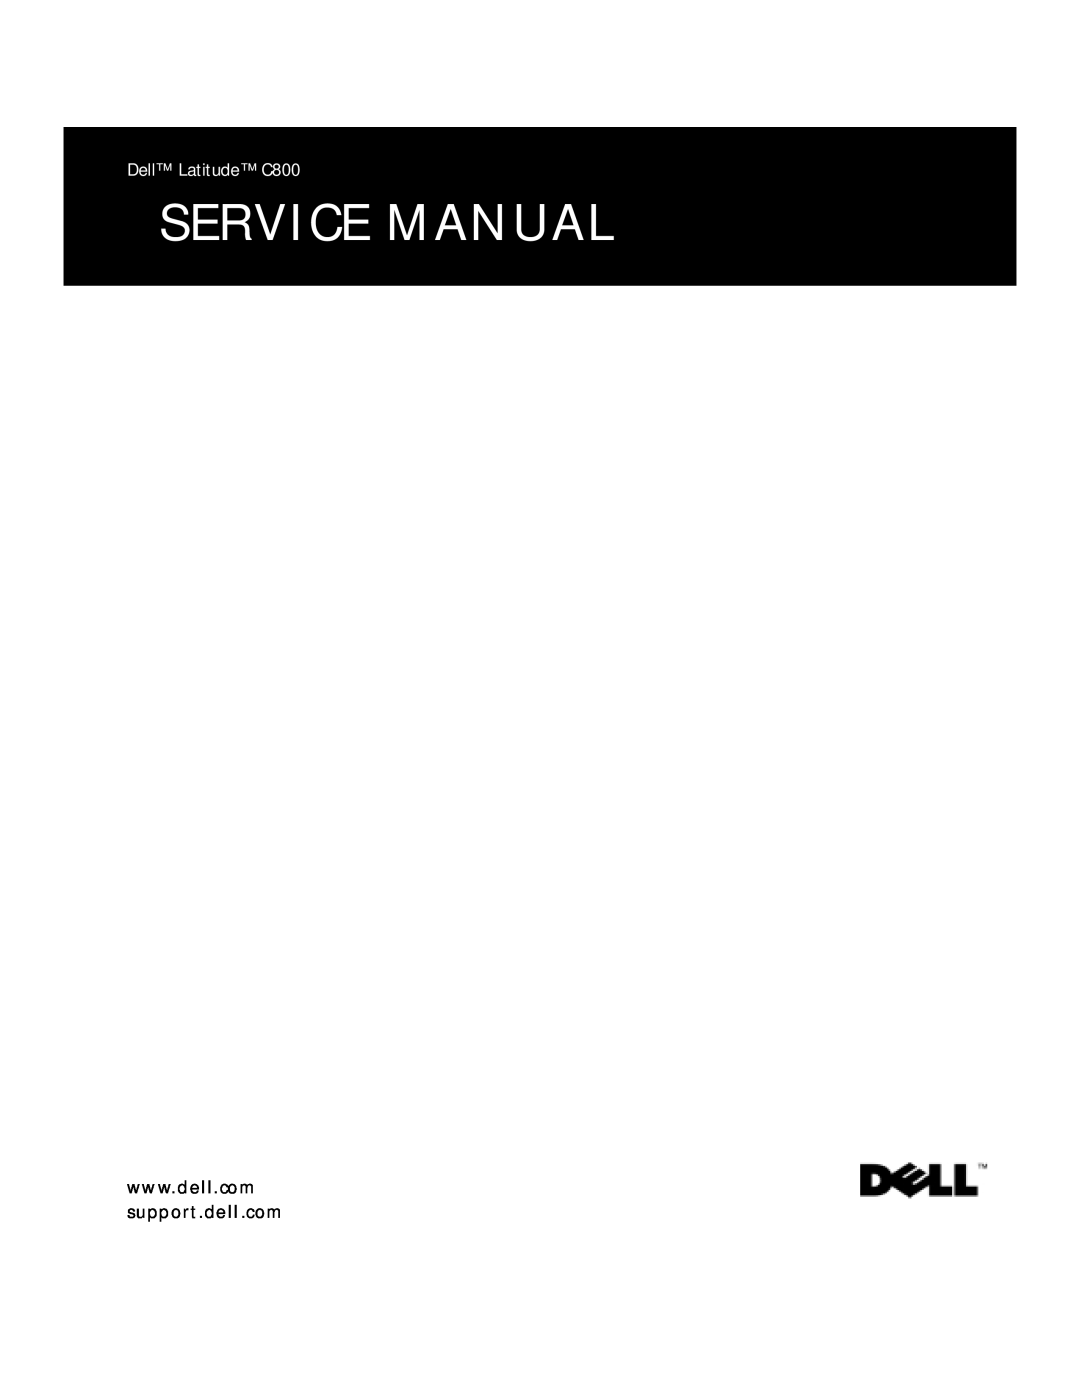 Applied Energy Products service manual Service Manual, Dell Latitude C800, support.dell.com 